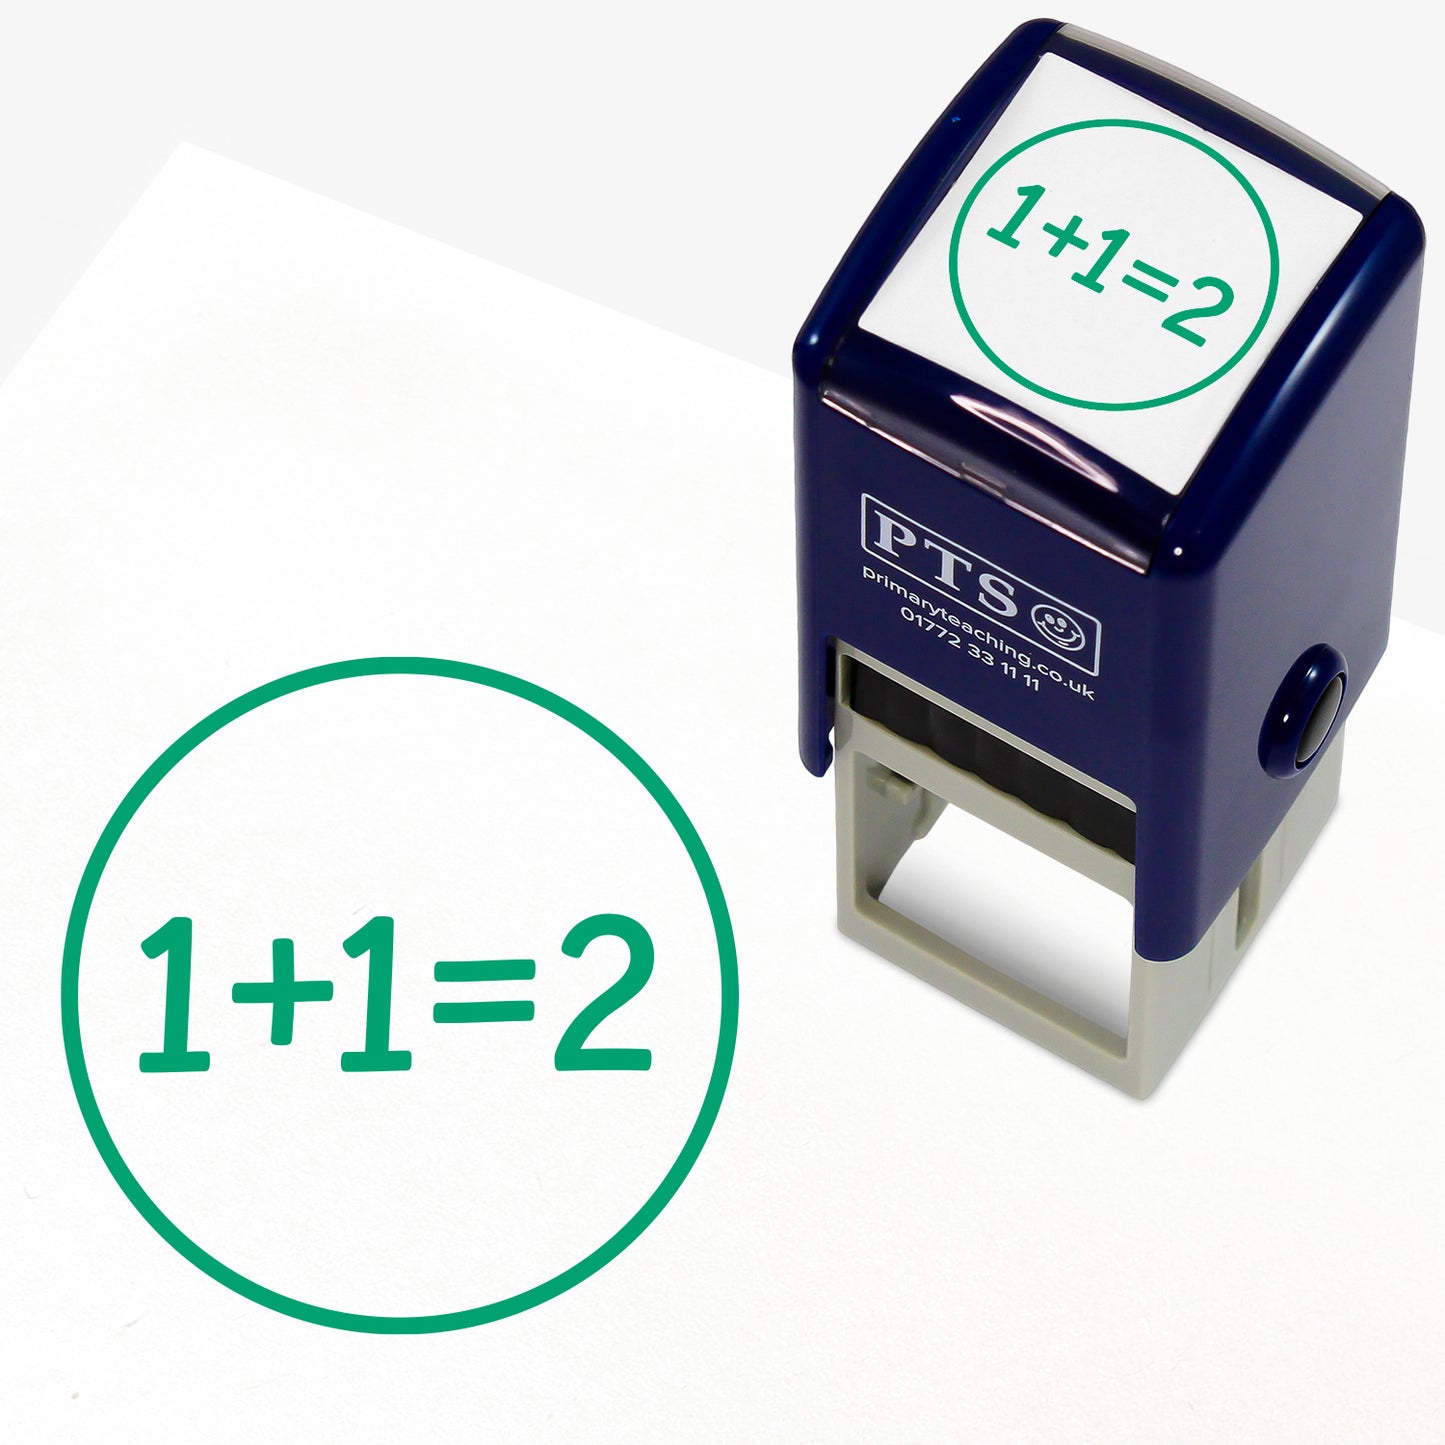 Show Your Working Stamper - 25mm